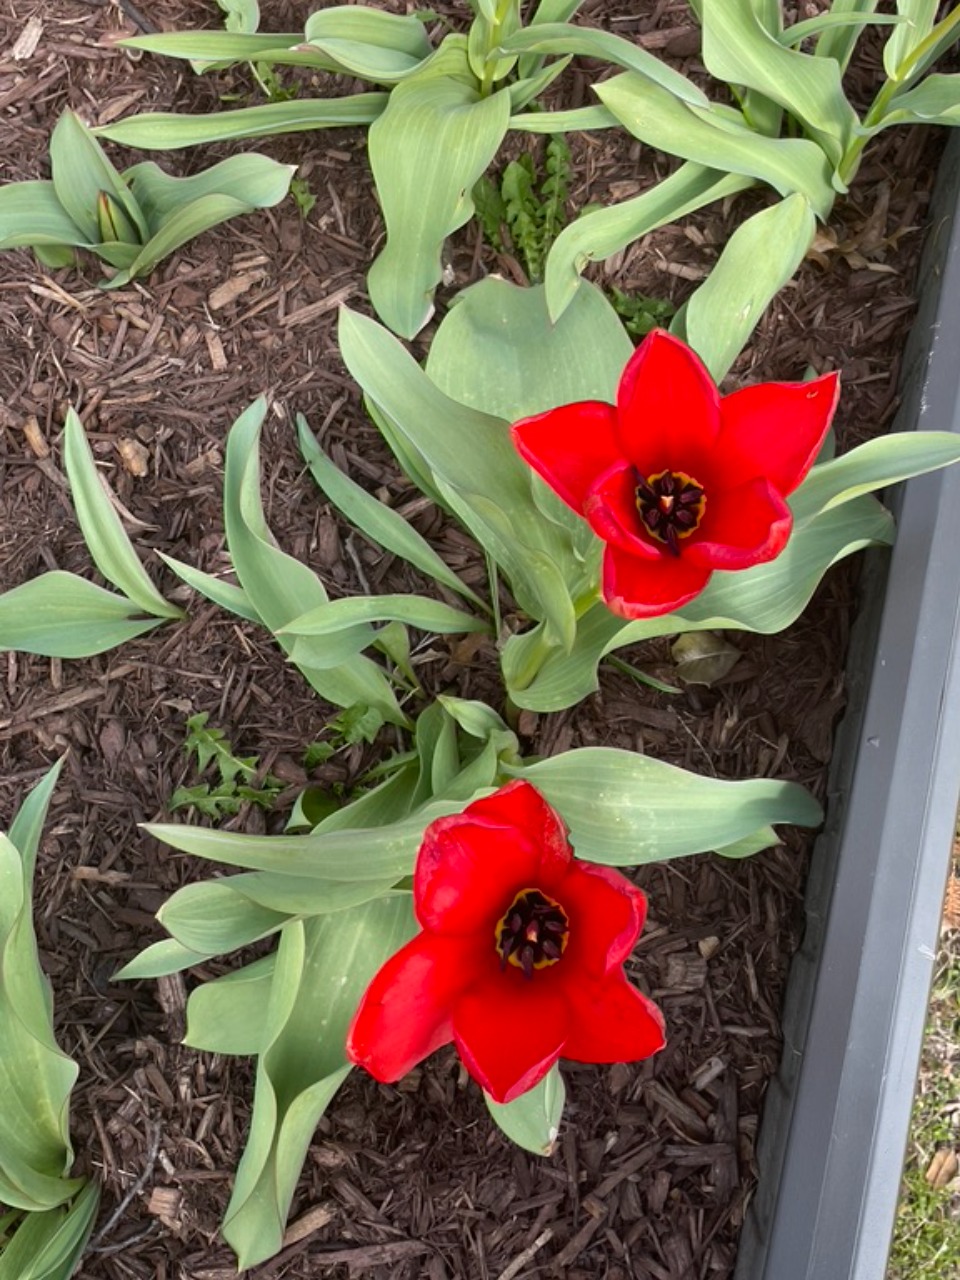 Two red tulips blooming in soil